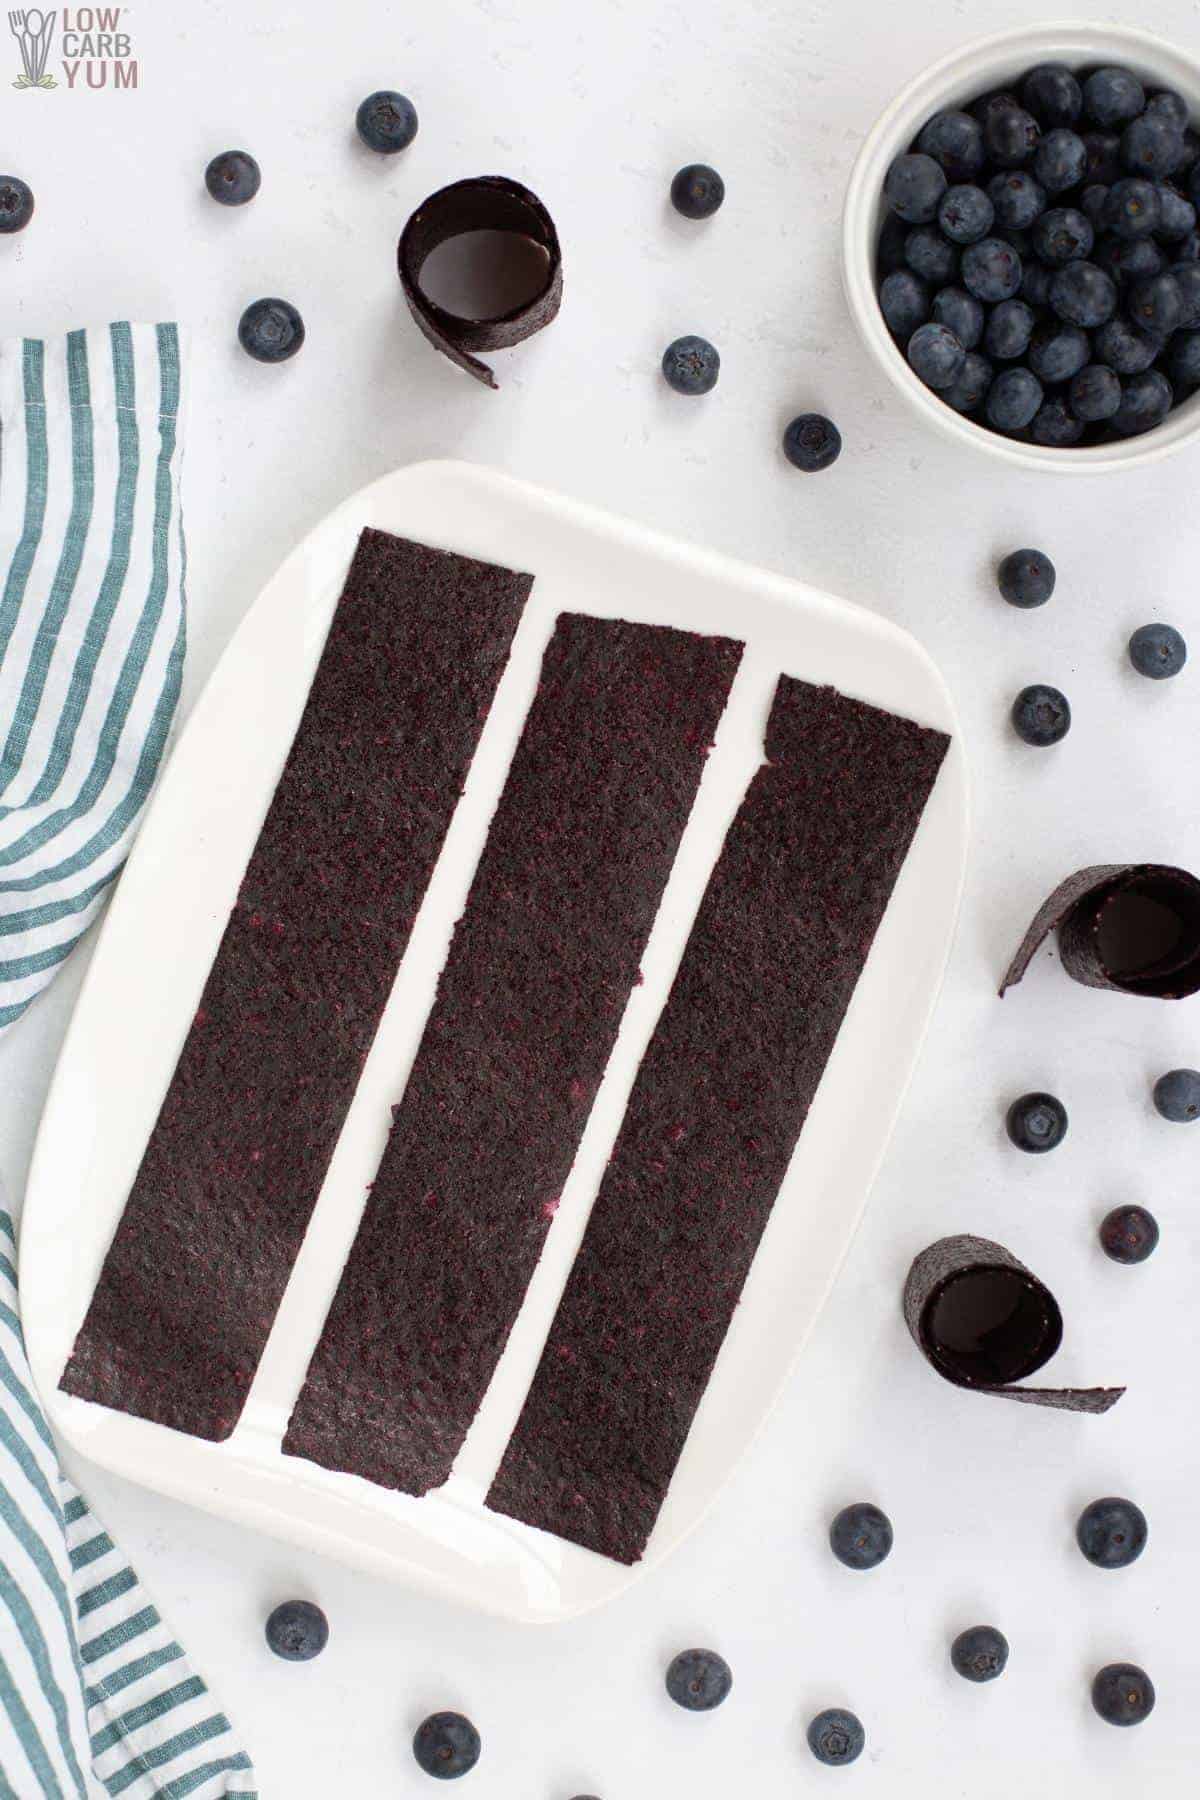 blueberry fruit leather strips.